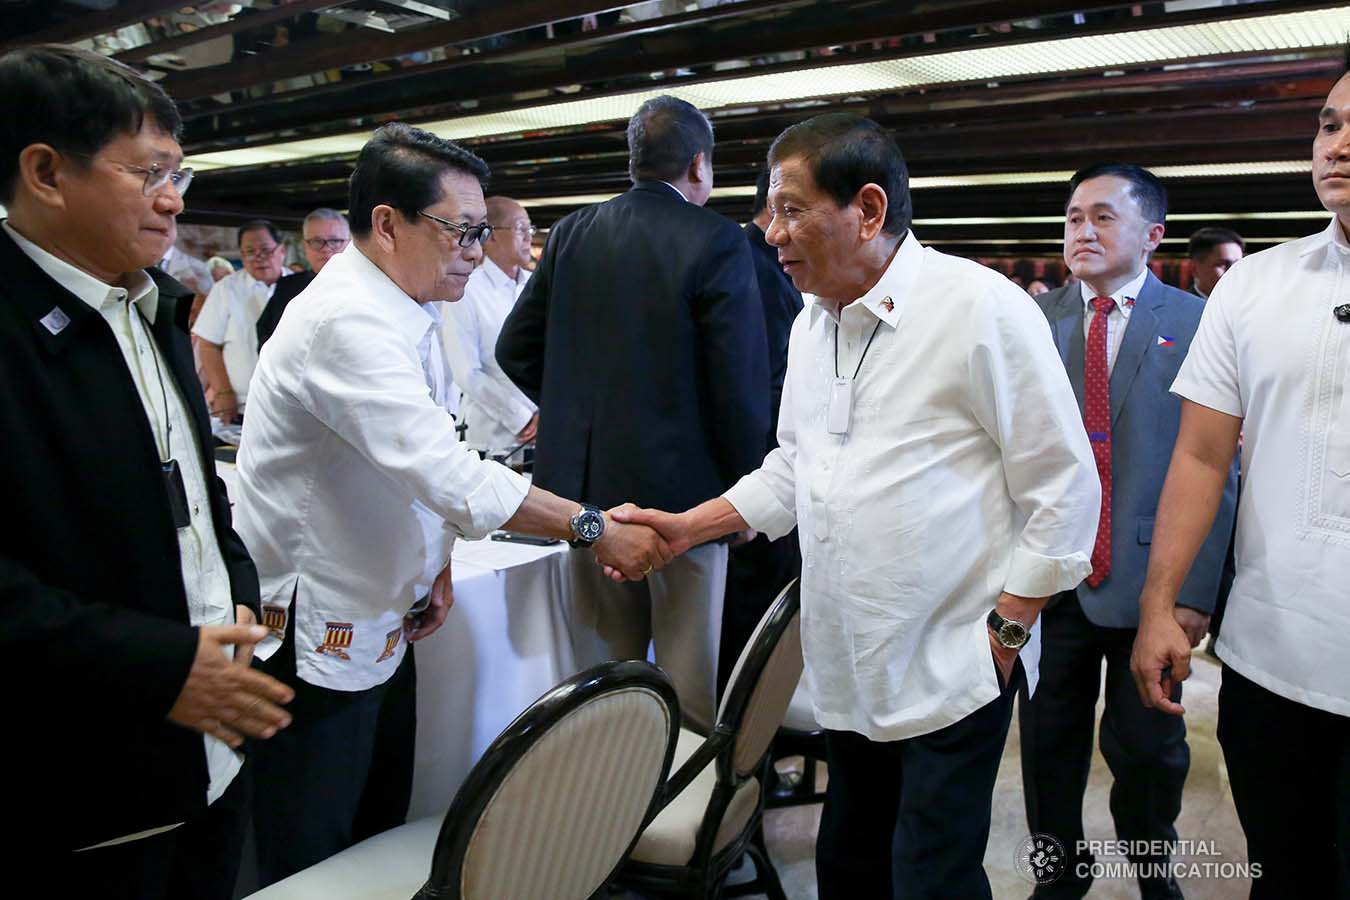 President Rodrigo Roa Duterte greets Labor and Employment Secretary Silvestre Bello III before the start of the meeting with the Inter-Agency Task Force for the Management of Emerging Infectious Diseases at the Malacañan Palace on March 9, 2020.